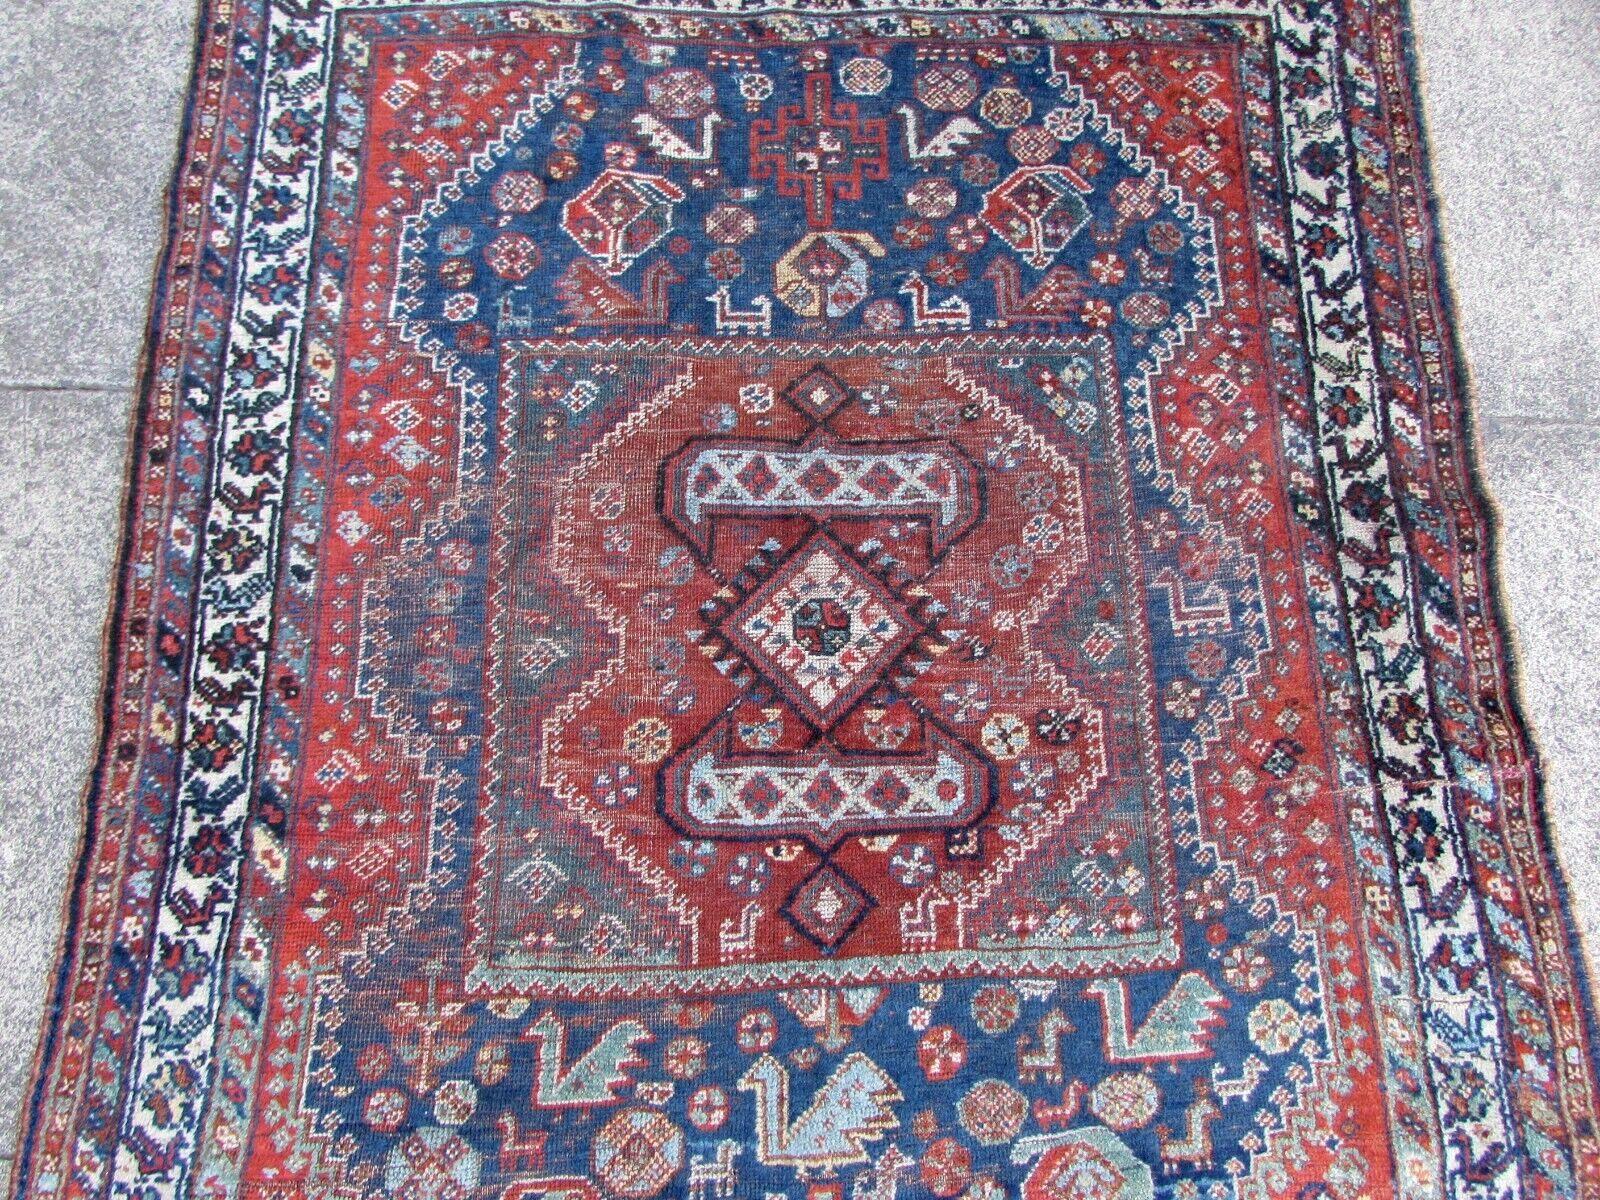 French Handmade Vintage Persian Style Shiraz Rug 3.8' x 4.9', 1920s, 1Q34 For Sale